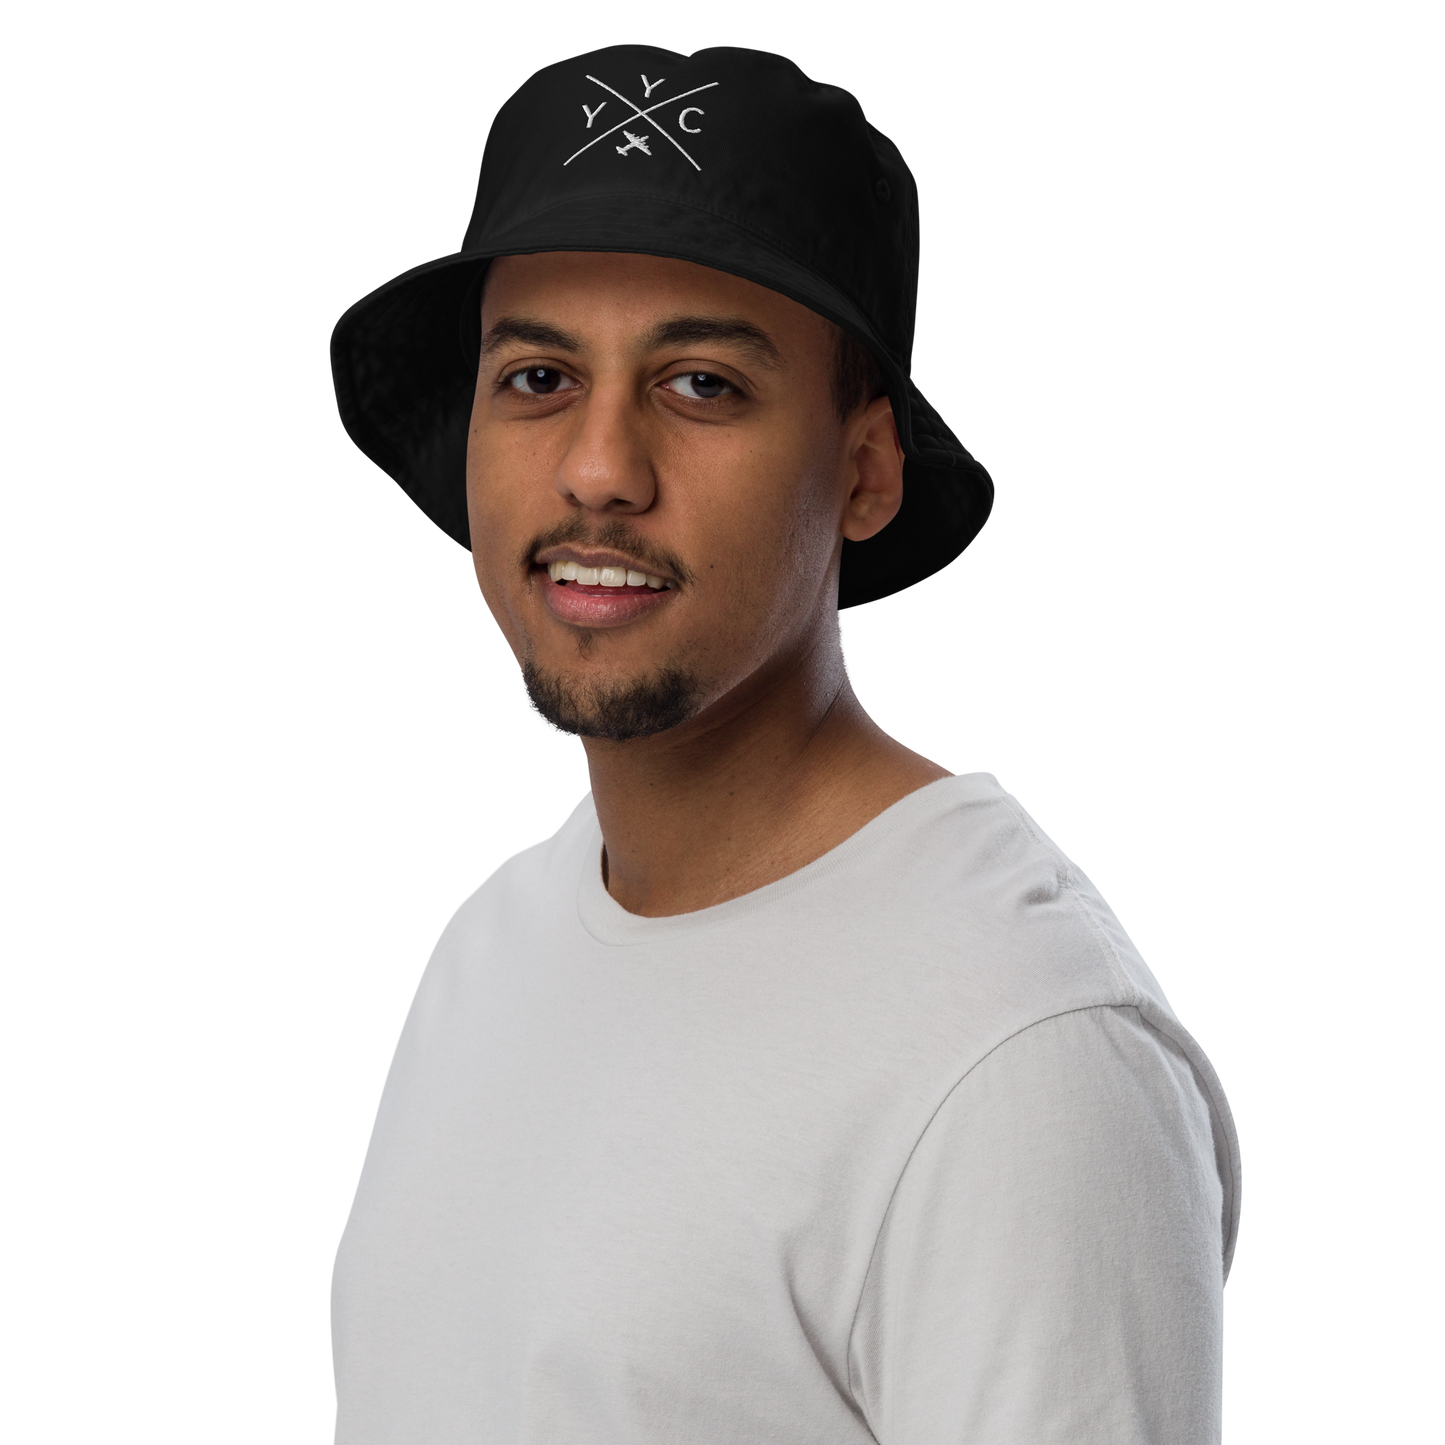 YHM Designs - YYC Calgary Organic Cotton Bucket Hat - Crossed-X Design with Airport Code and Vintage Propliner - White Embroidery - Image 05